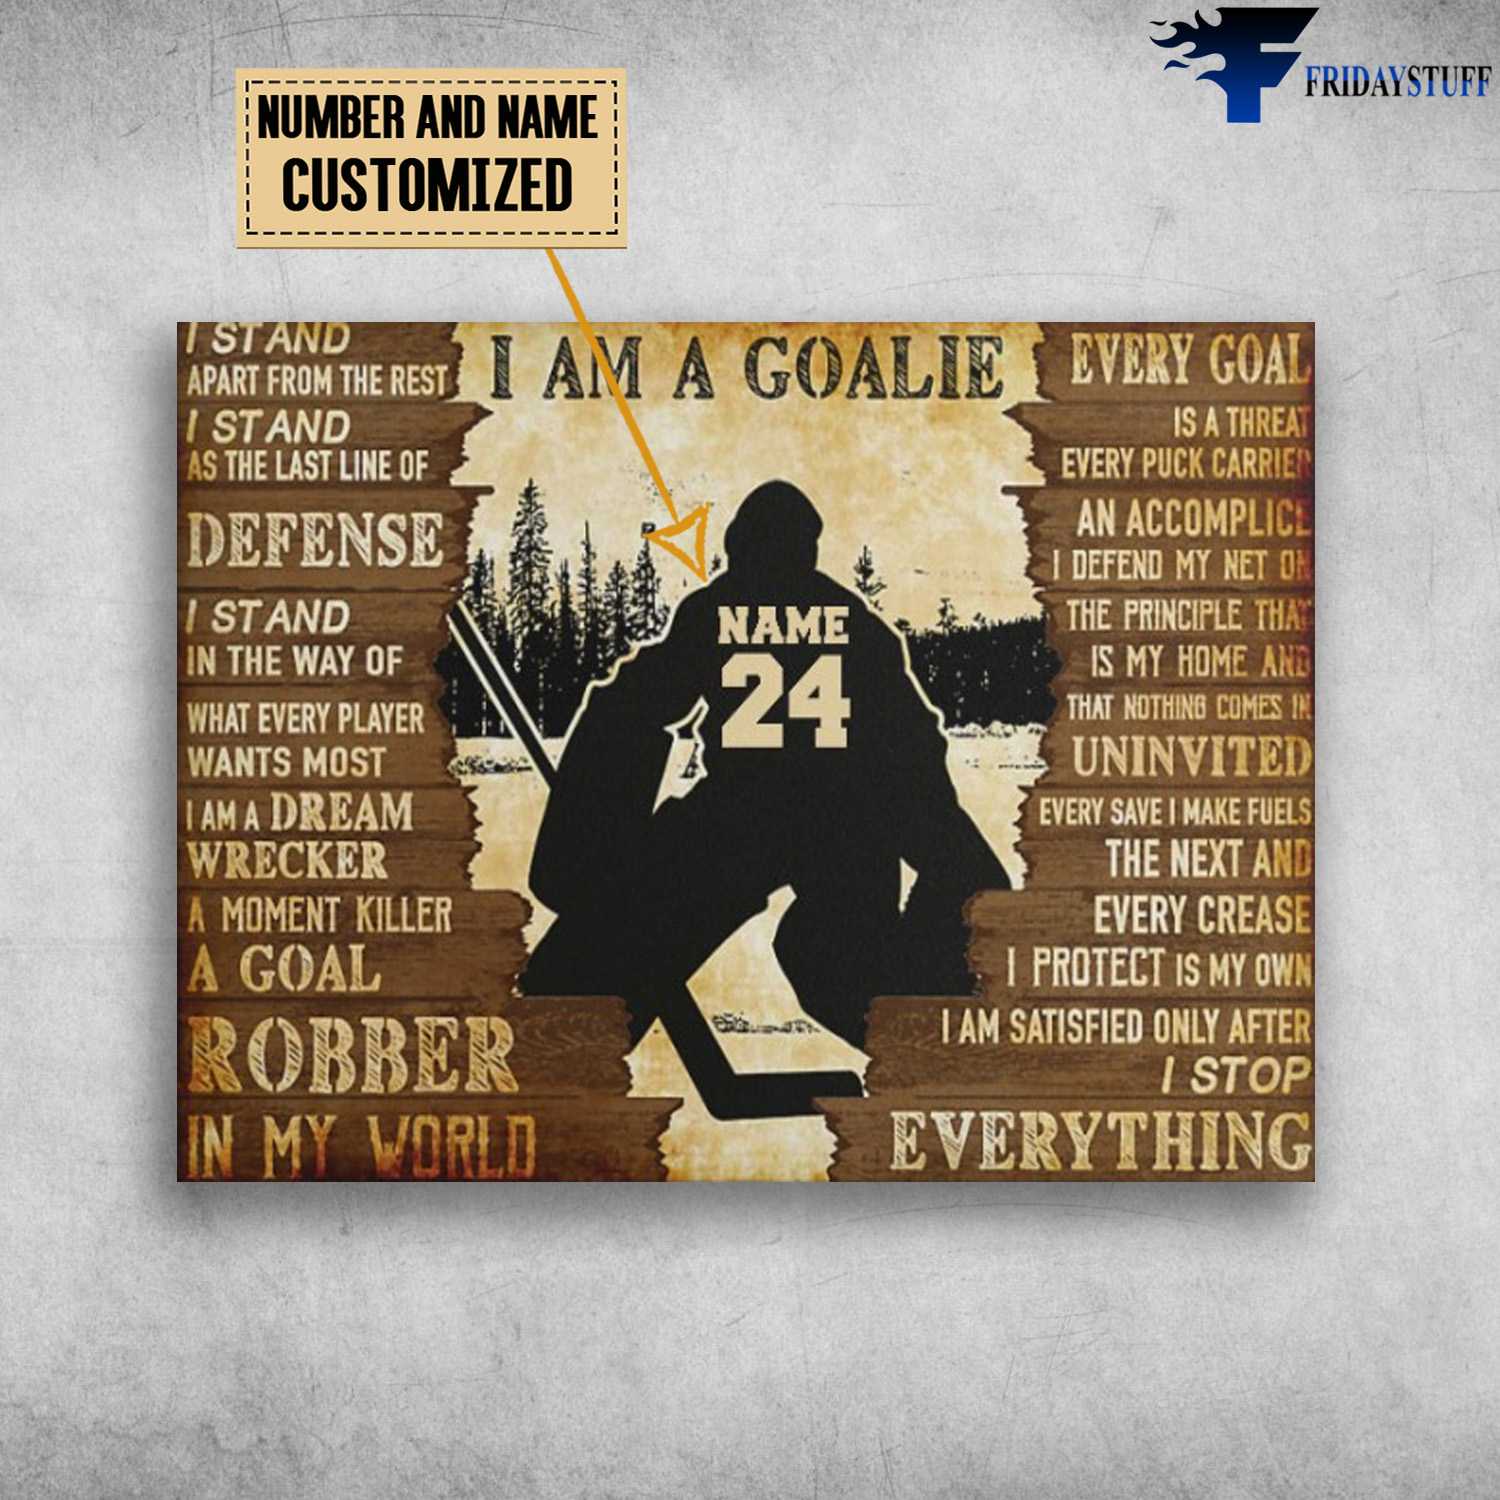 Hockey Player, Ice Hockey Lover, I Stand Apart From The Rest, I Stand As The Last Lie Of Defense, I Stand In The Way Of What Every Player, Every Goal Is A Threat